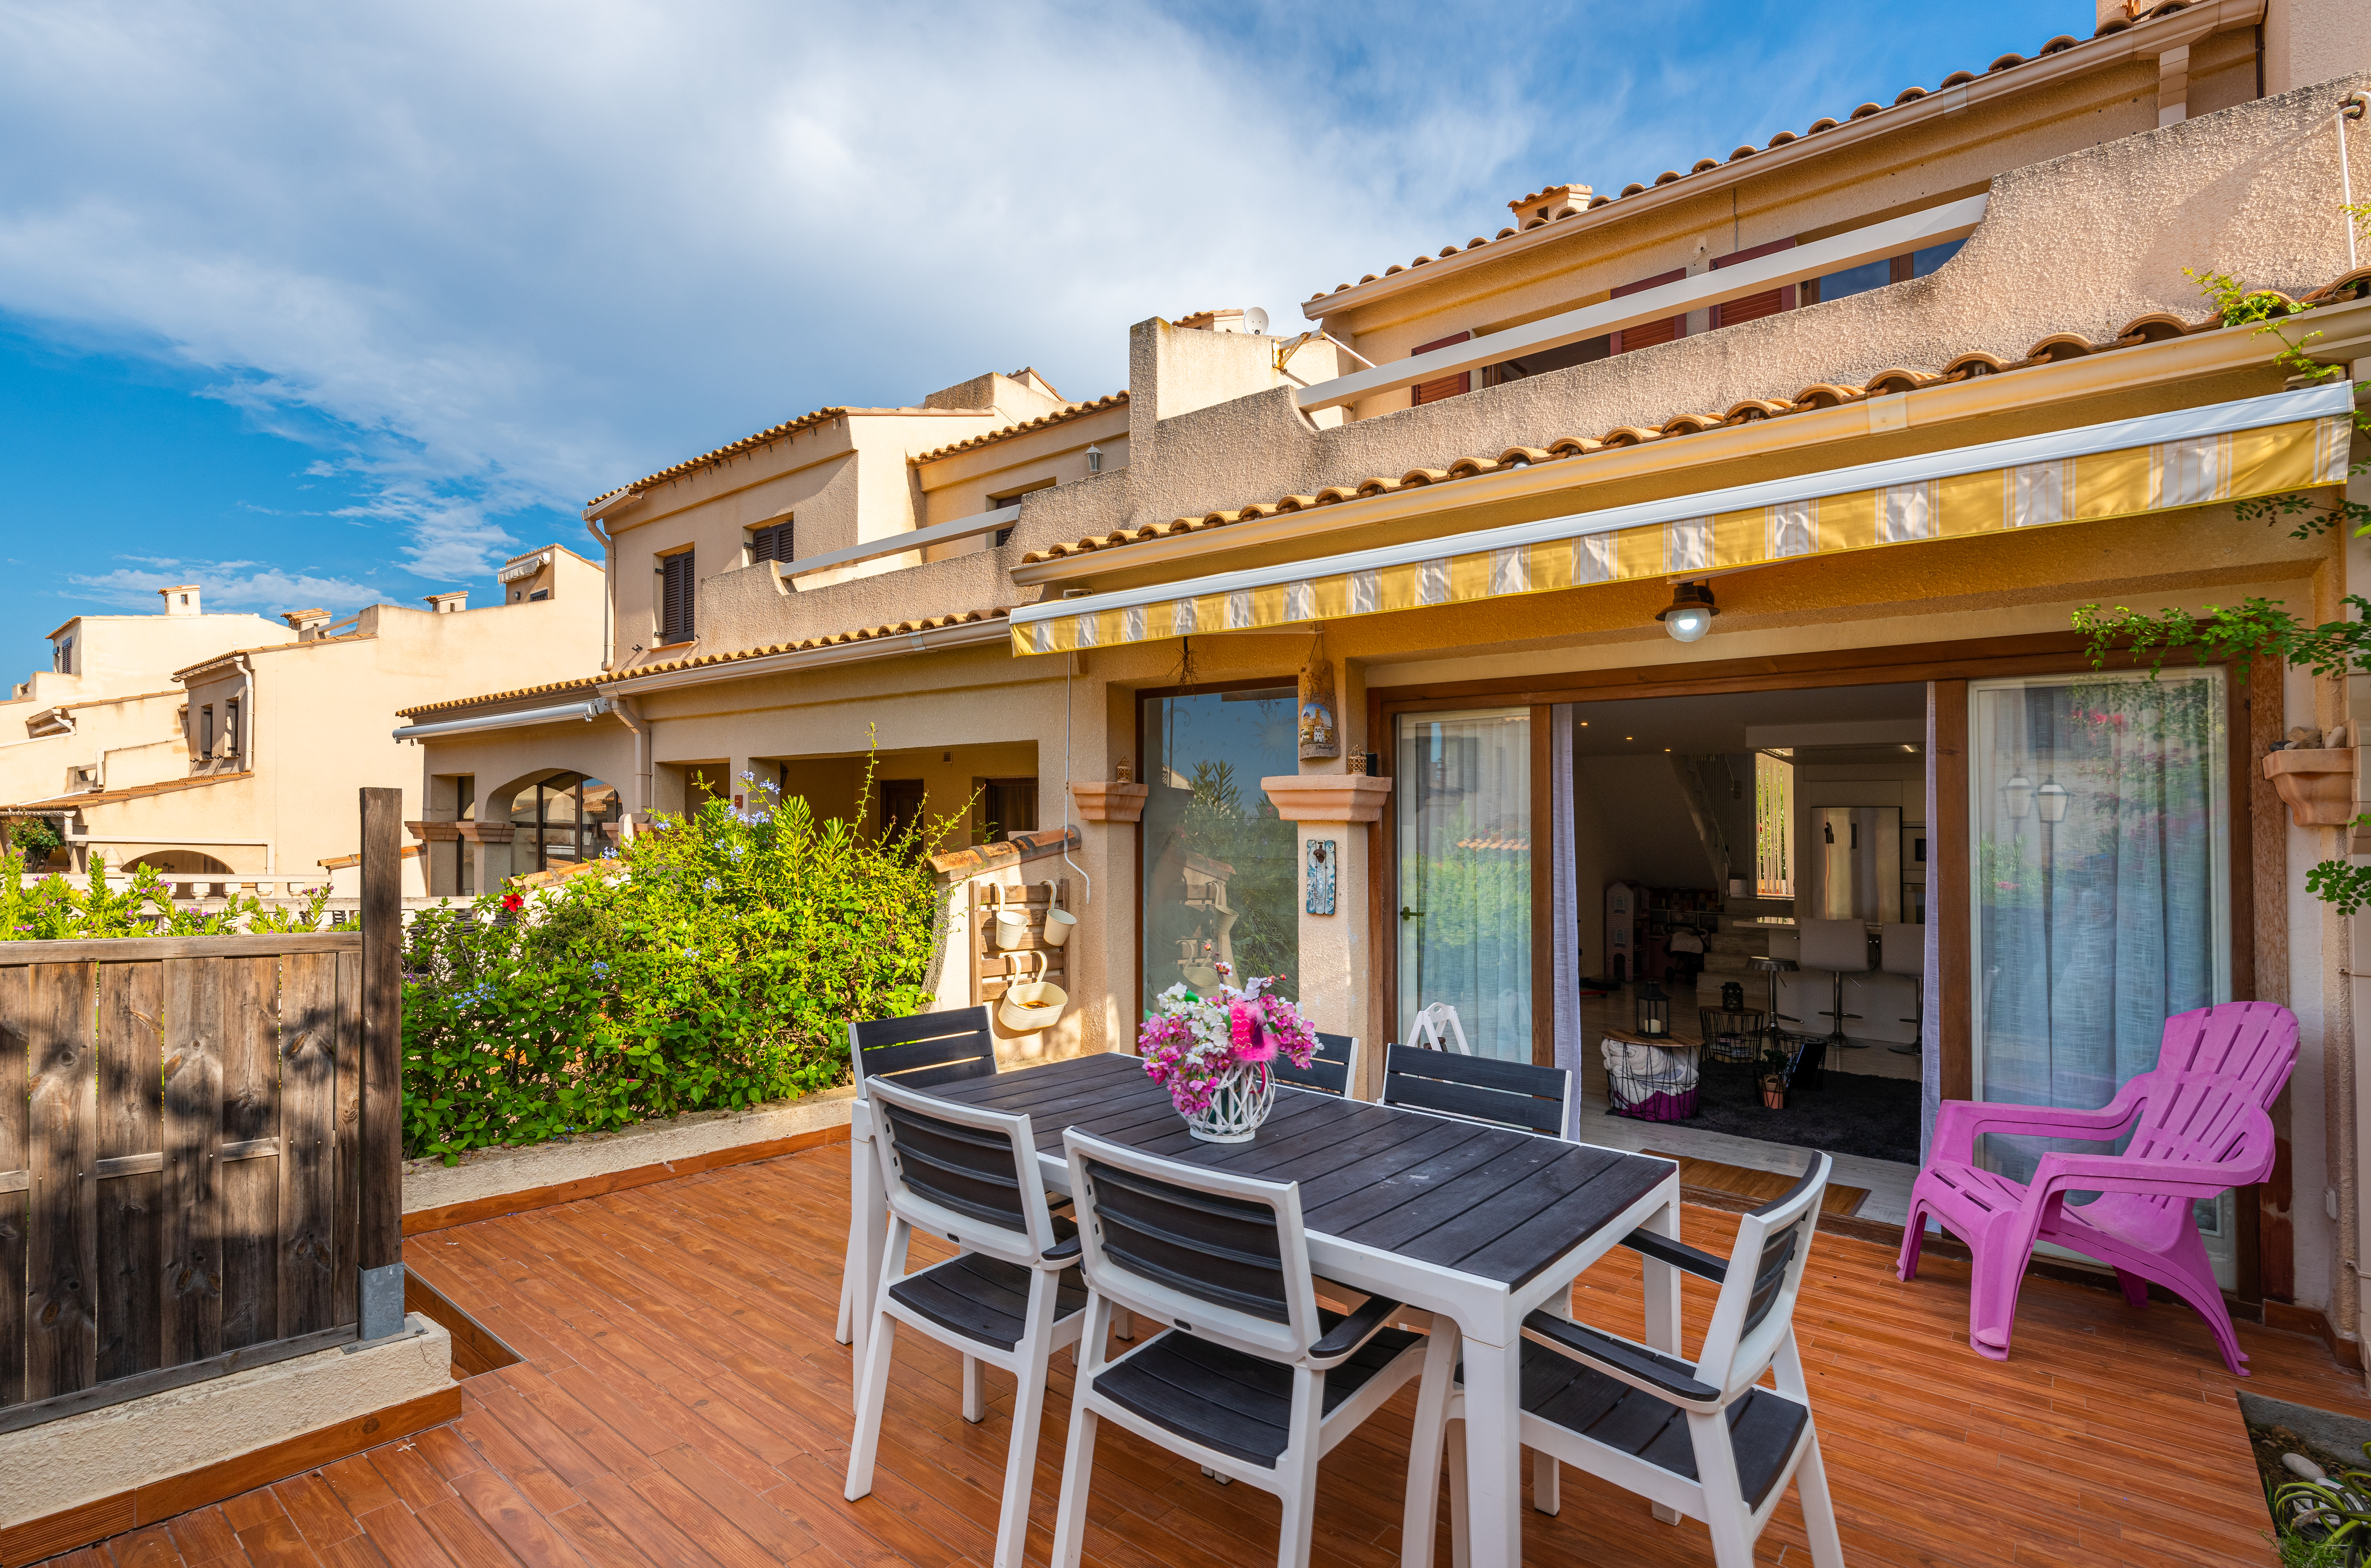 For sale: 3 bedroom house / villa in Gran Alacant